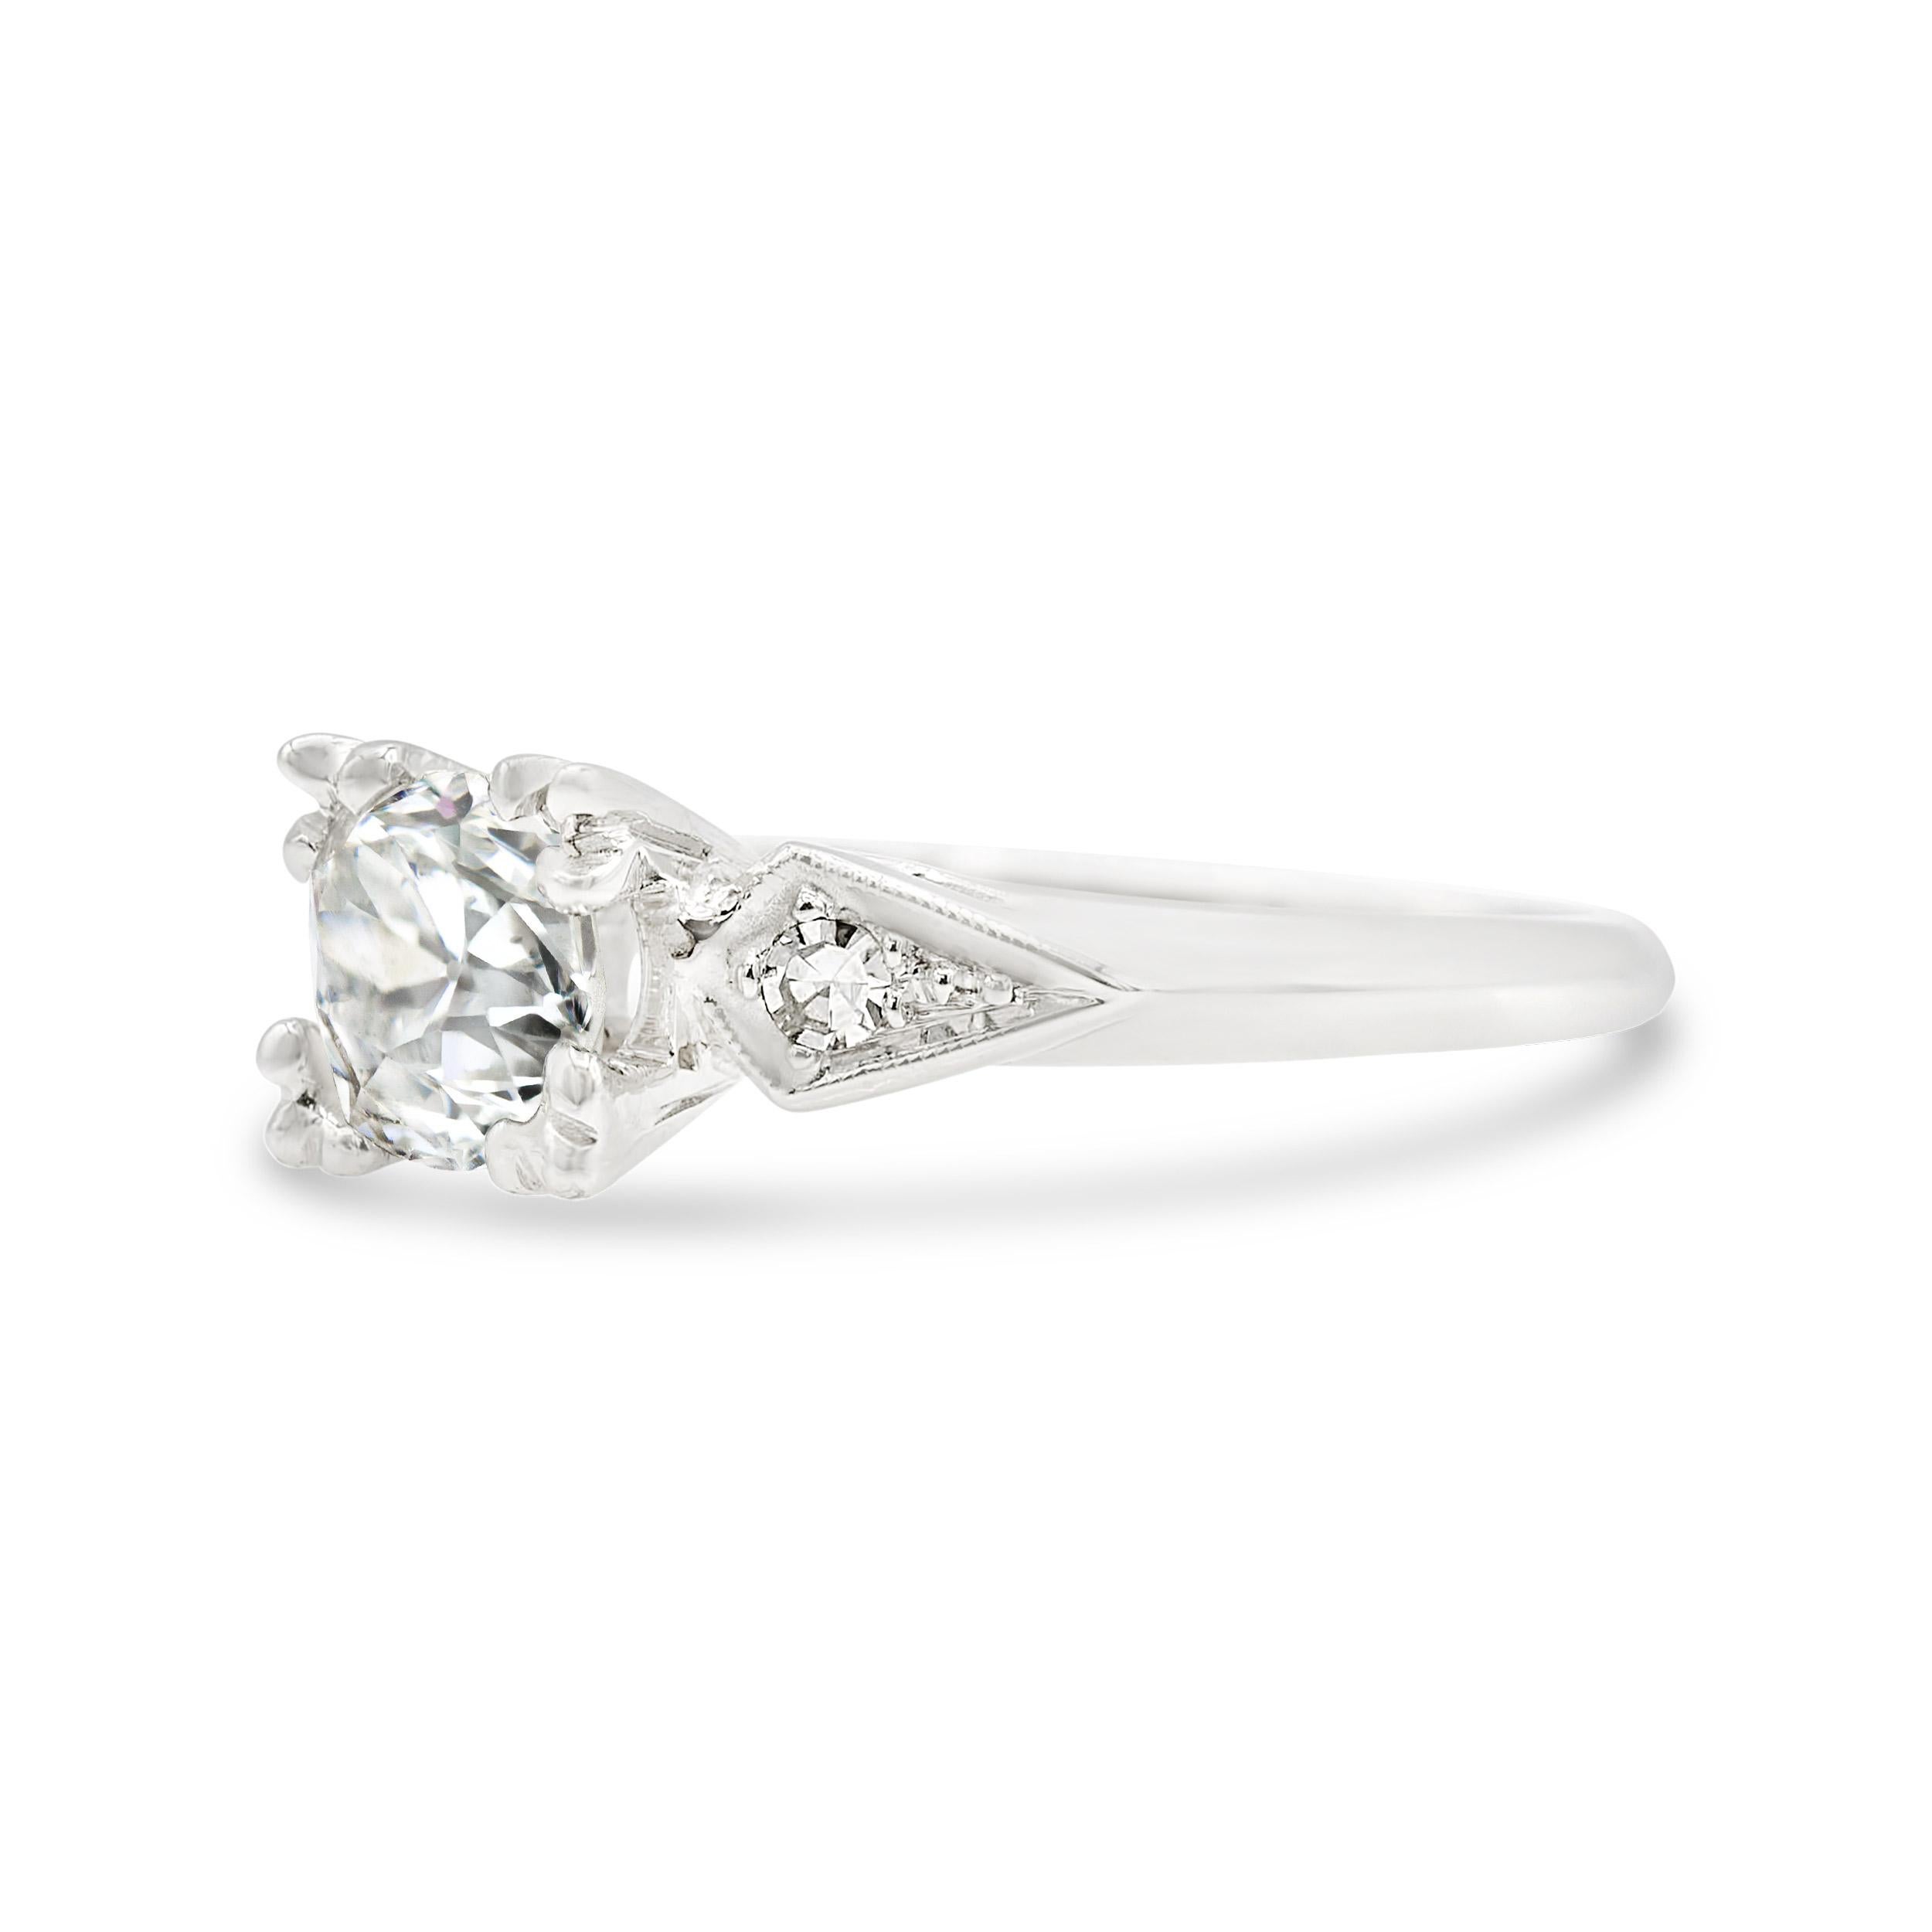 Mirror mirror on the wall, this snow-white Deco engagement ring is the fairest of them all! At its center is an exceptionally bright GIA-certified E color diamond that radiates from a fishtail prong setting. Flanked by sparkly arrow-shaped diamond